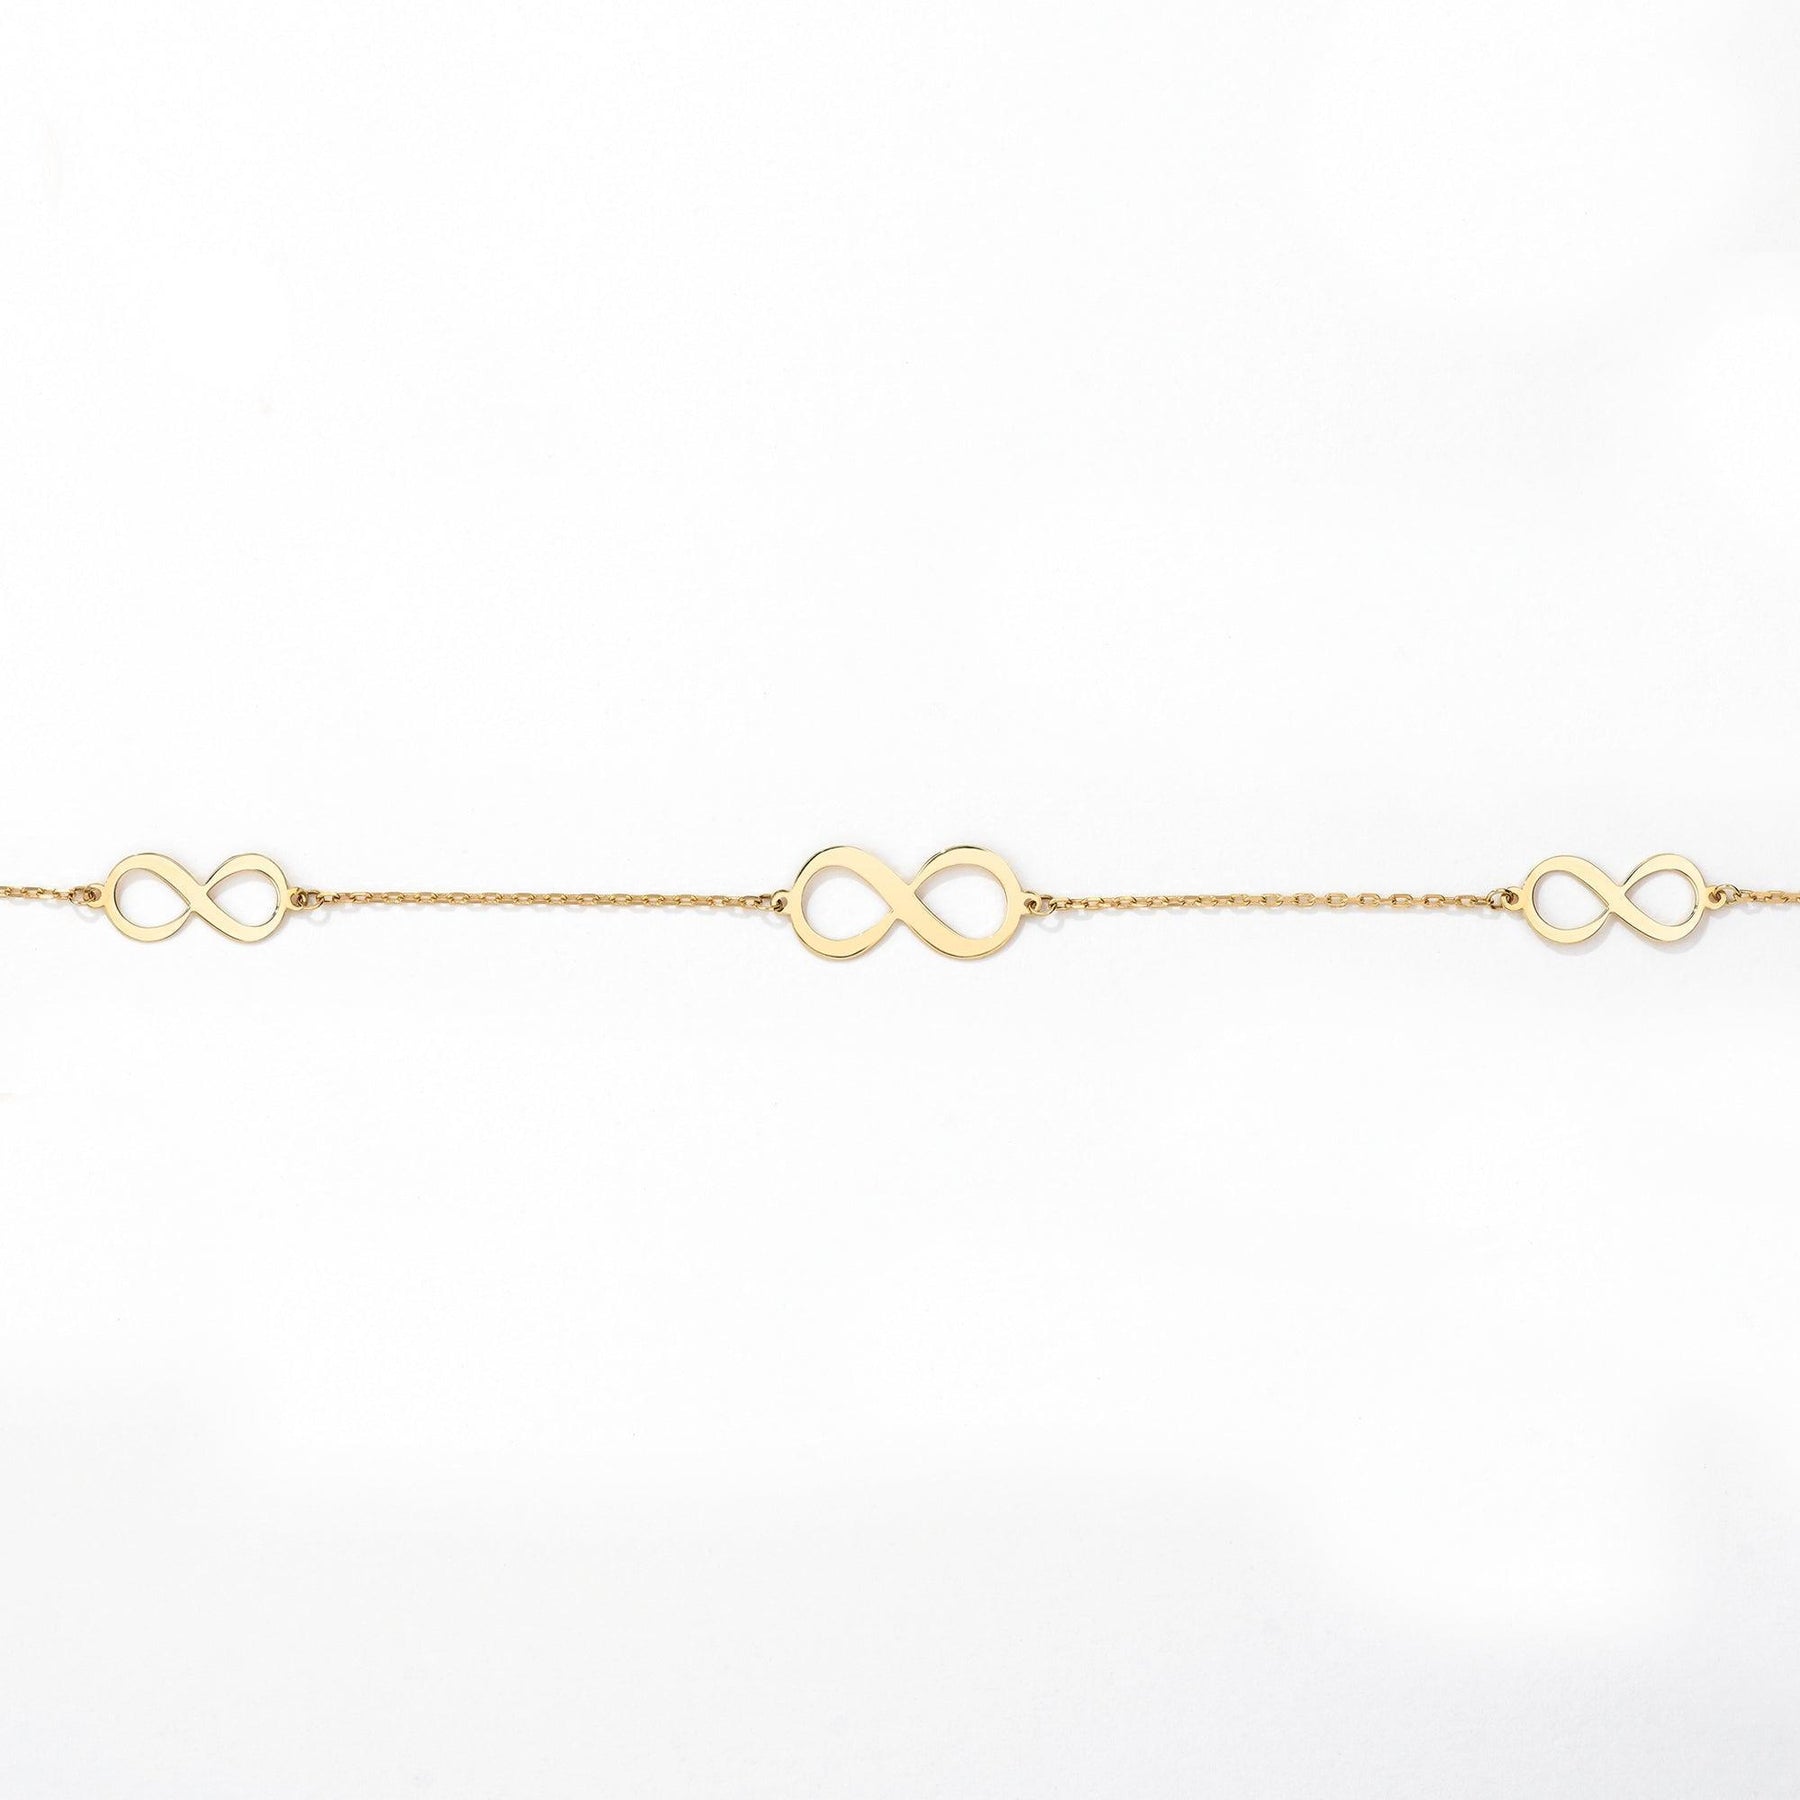 Infinity Bracelet in 9ct Yellow Gold - Wallace Bishop